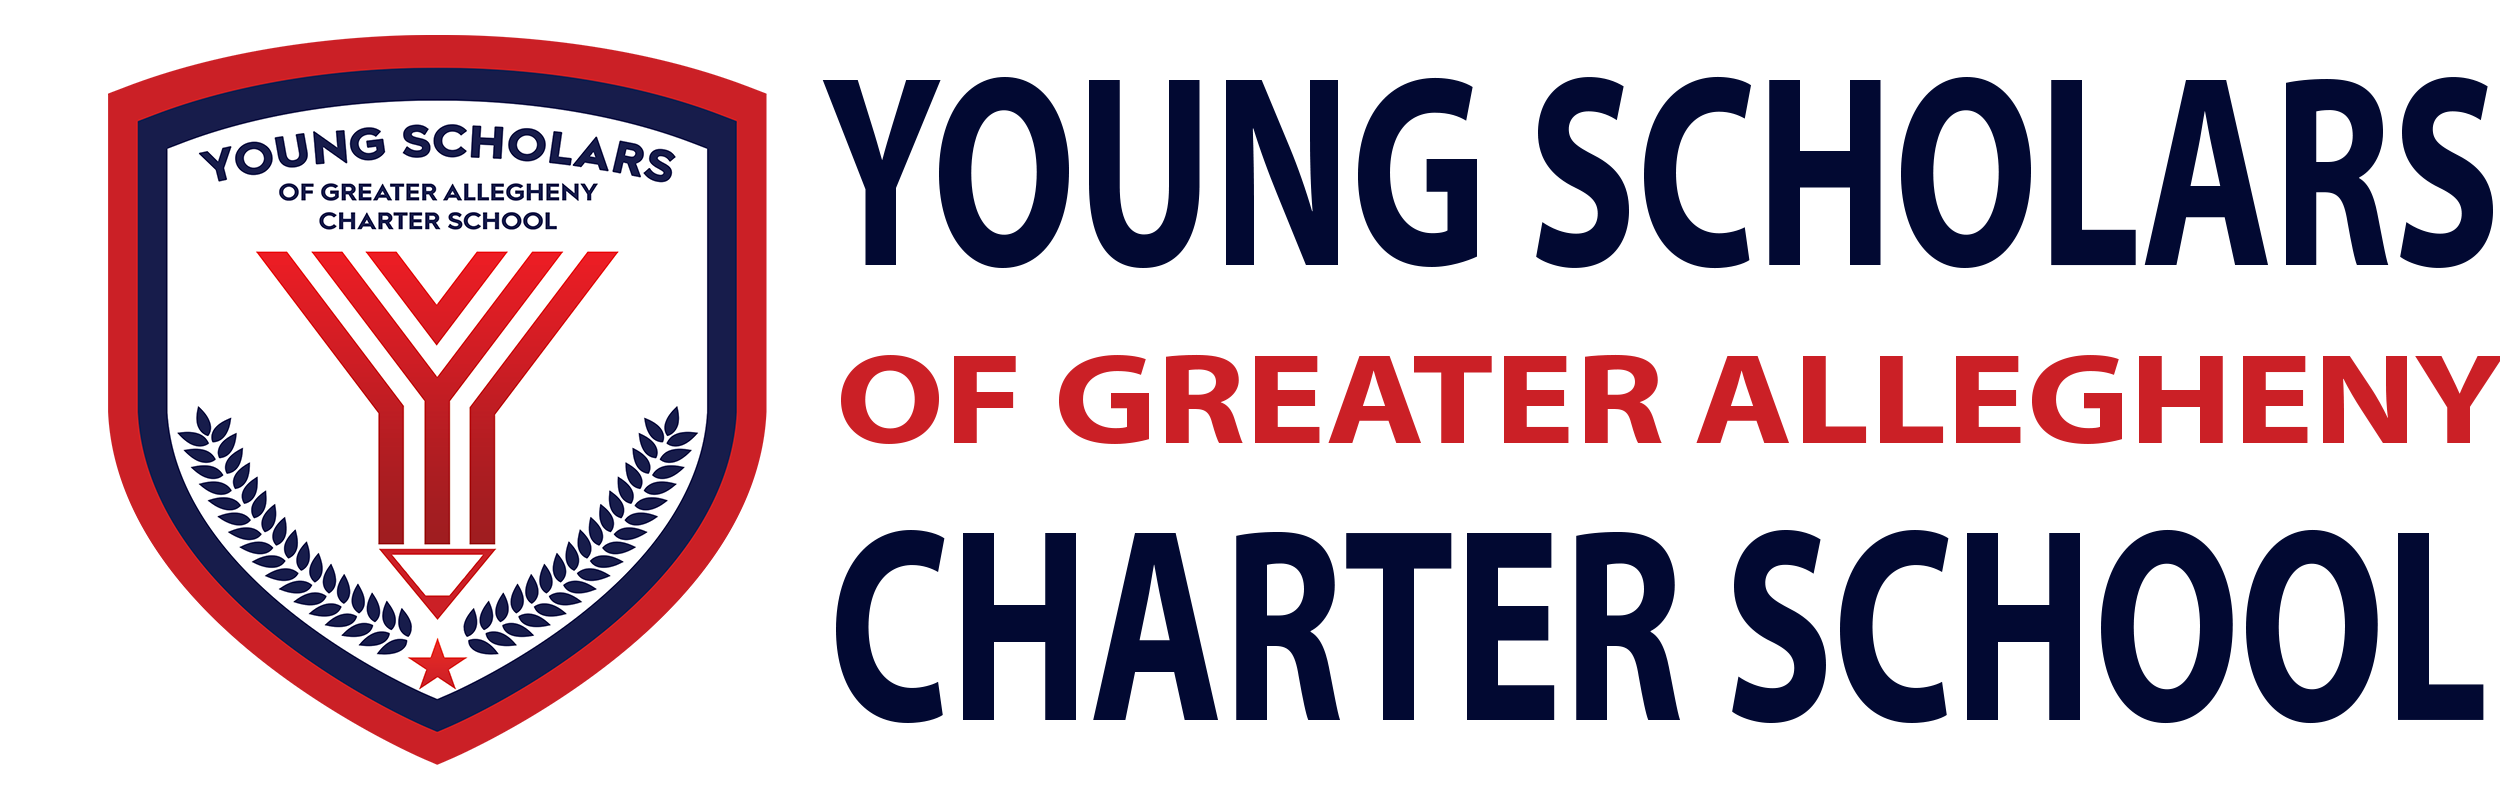 Young Scholars of Greater Allegheny Charter School